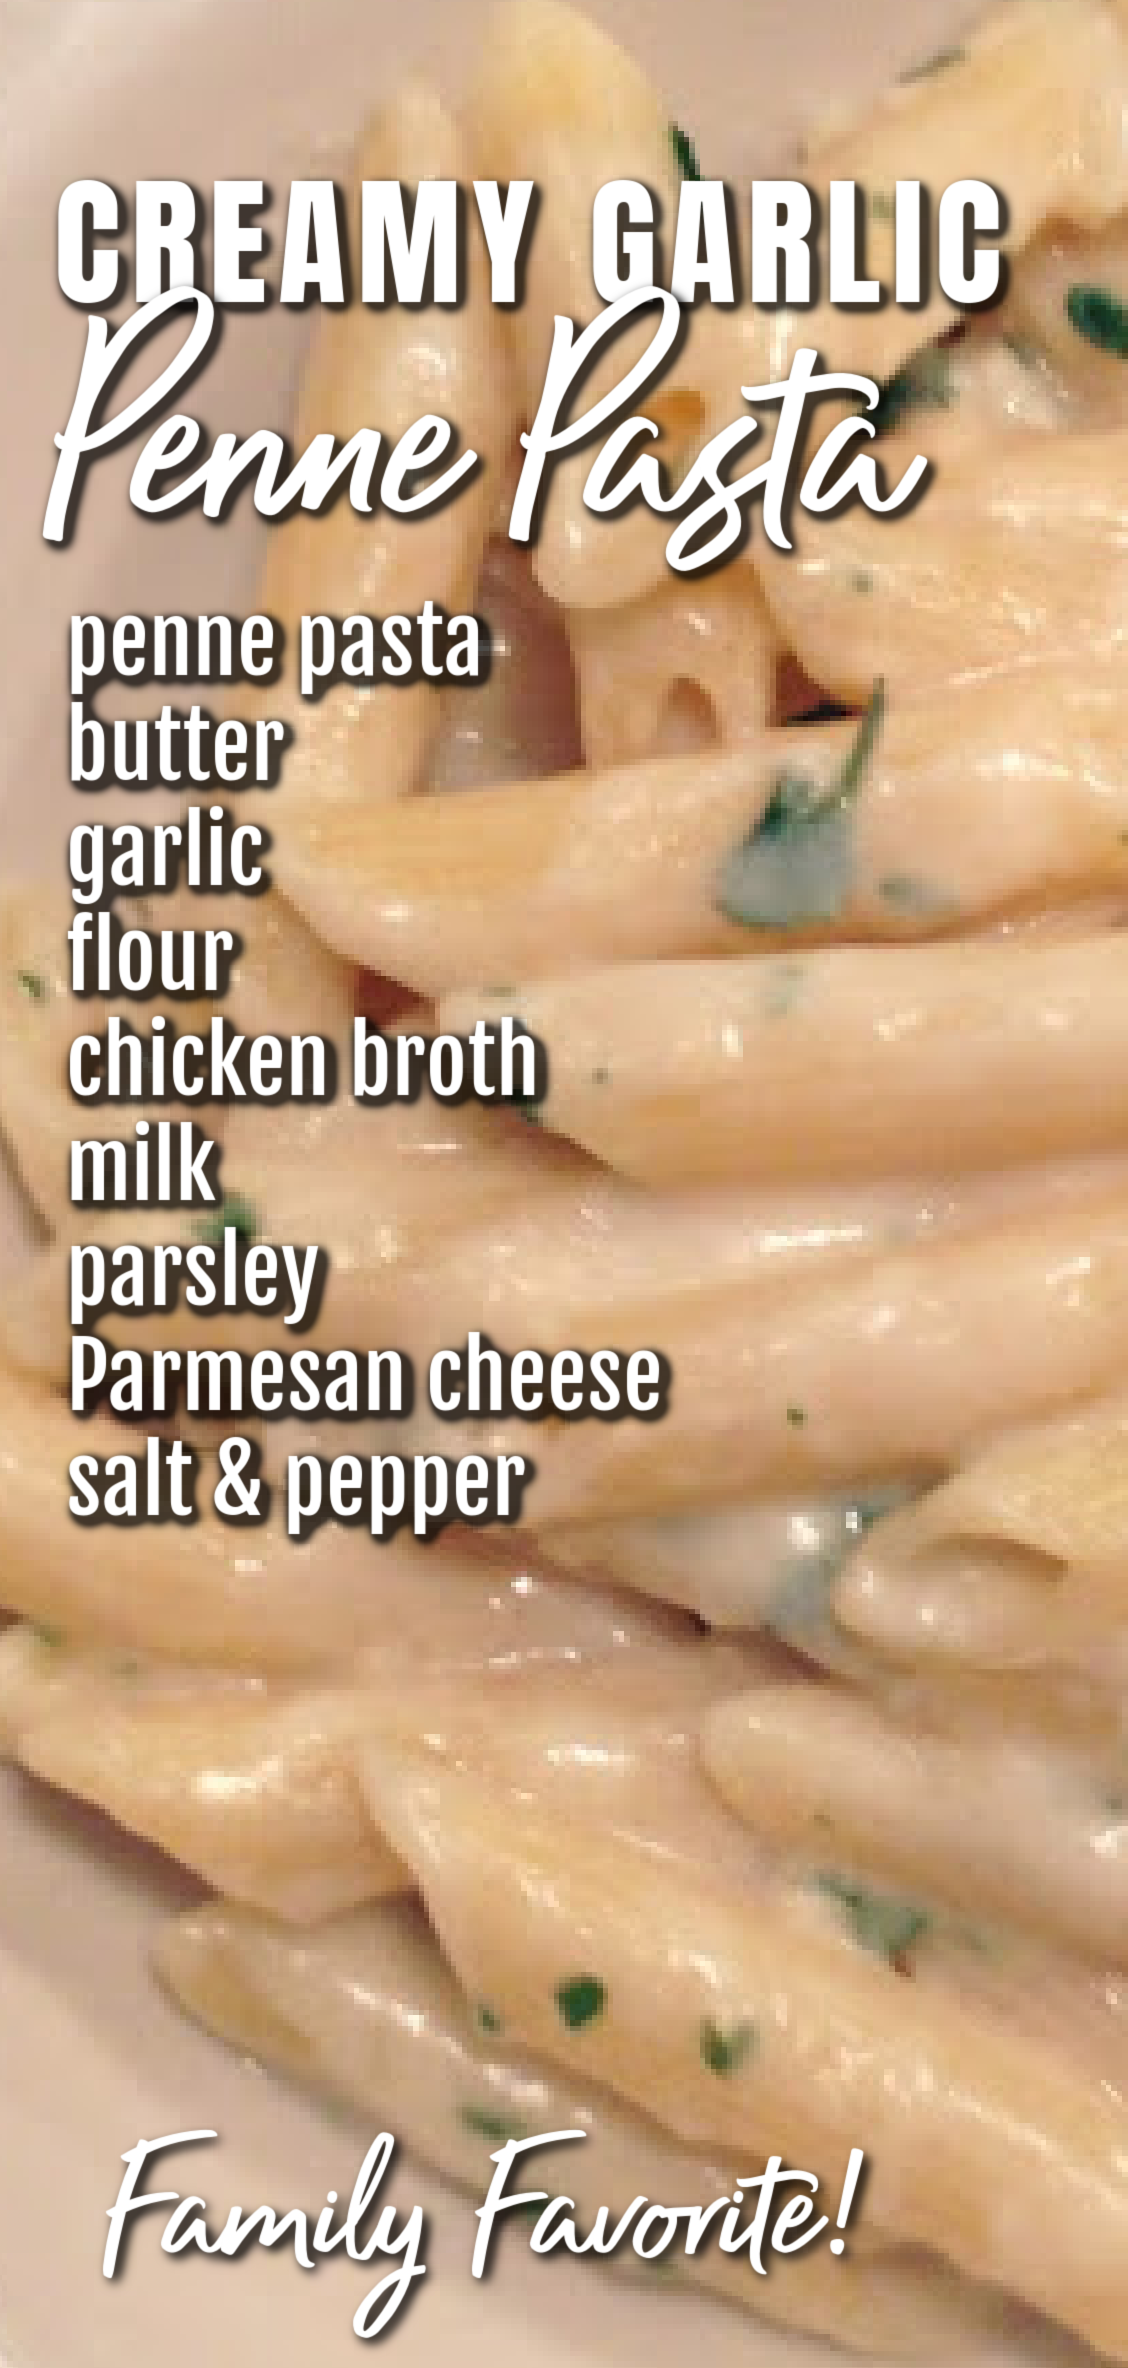 This image shows creamy garlic penne pasta served in a white bowl. The photo has text listing the ingredients needed to make the dish - penne pasta butter garlic, flour, chicken broth, milk, parsley, Parmesan cheese, salt and pepper.